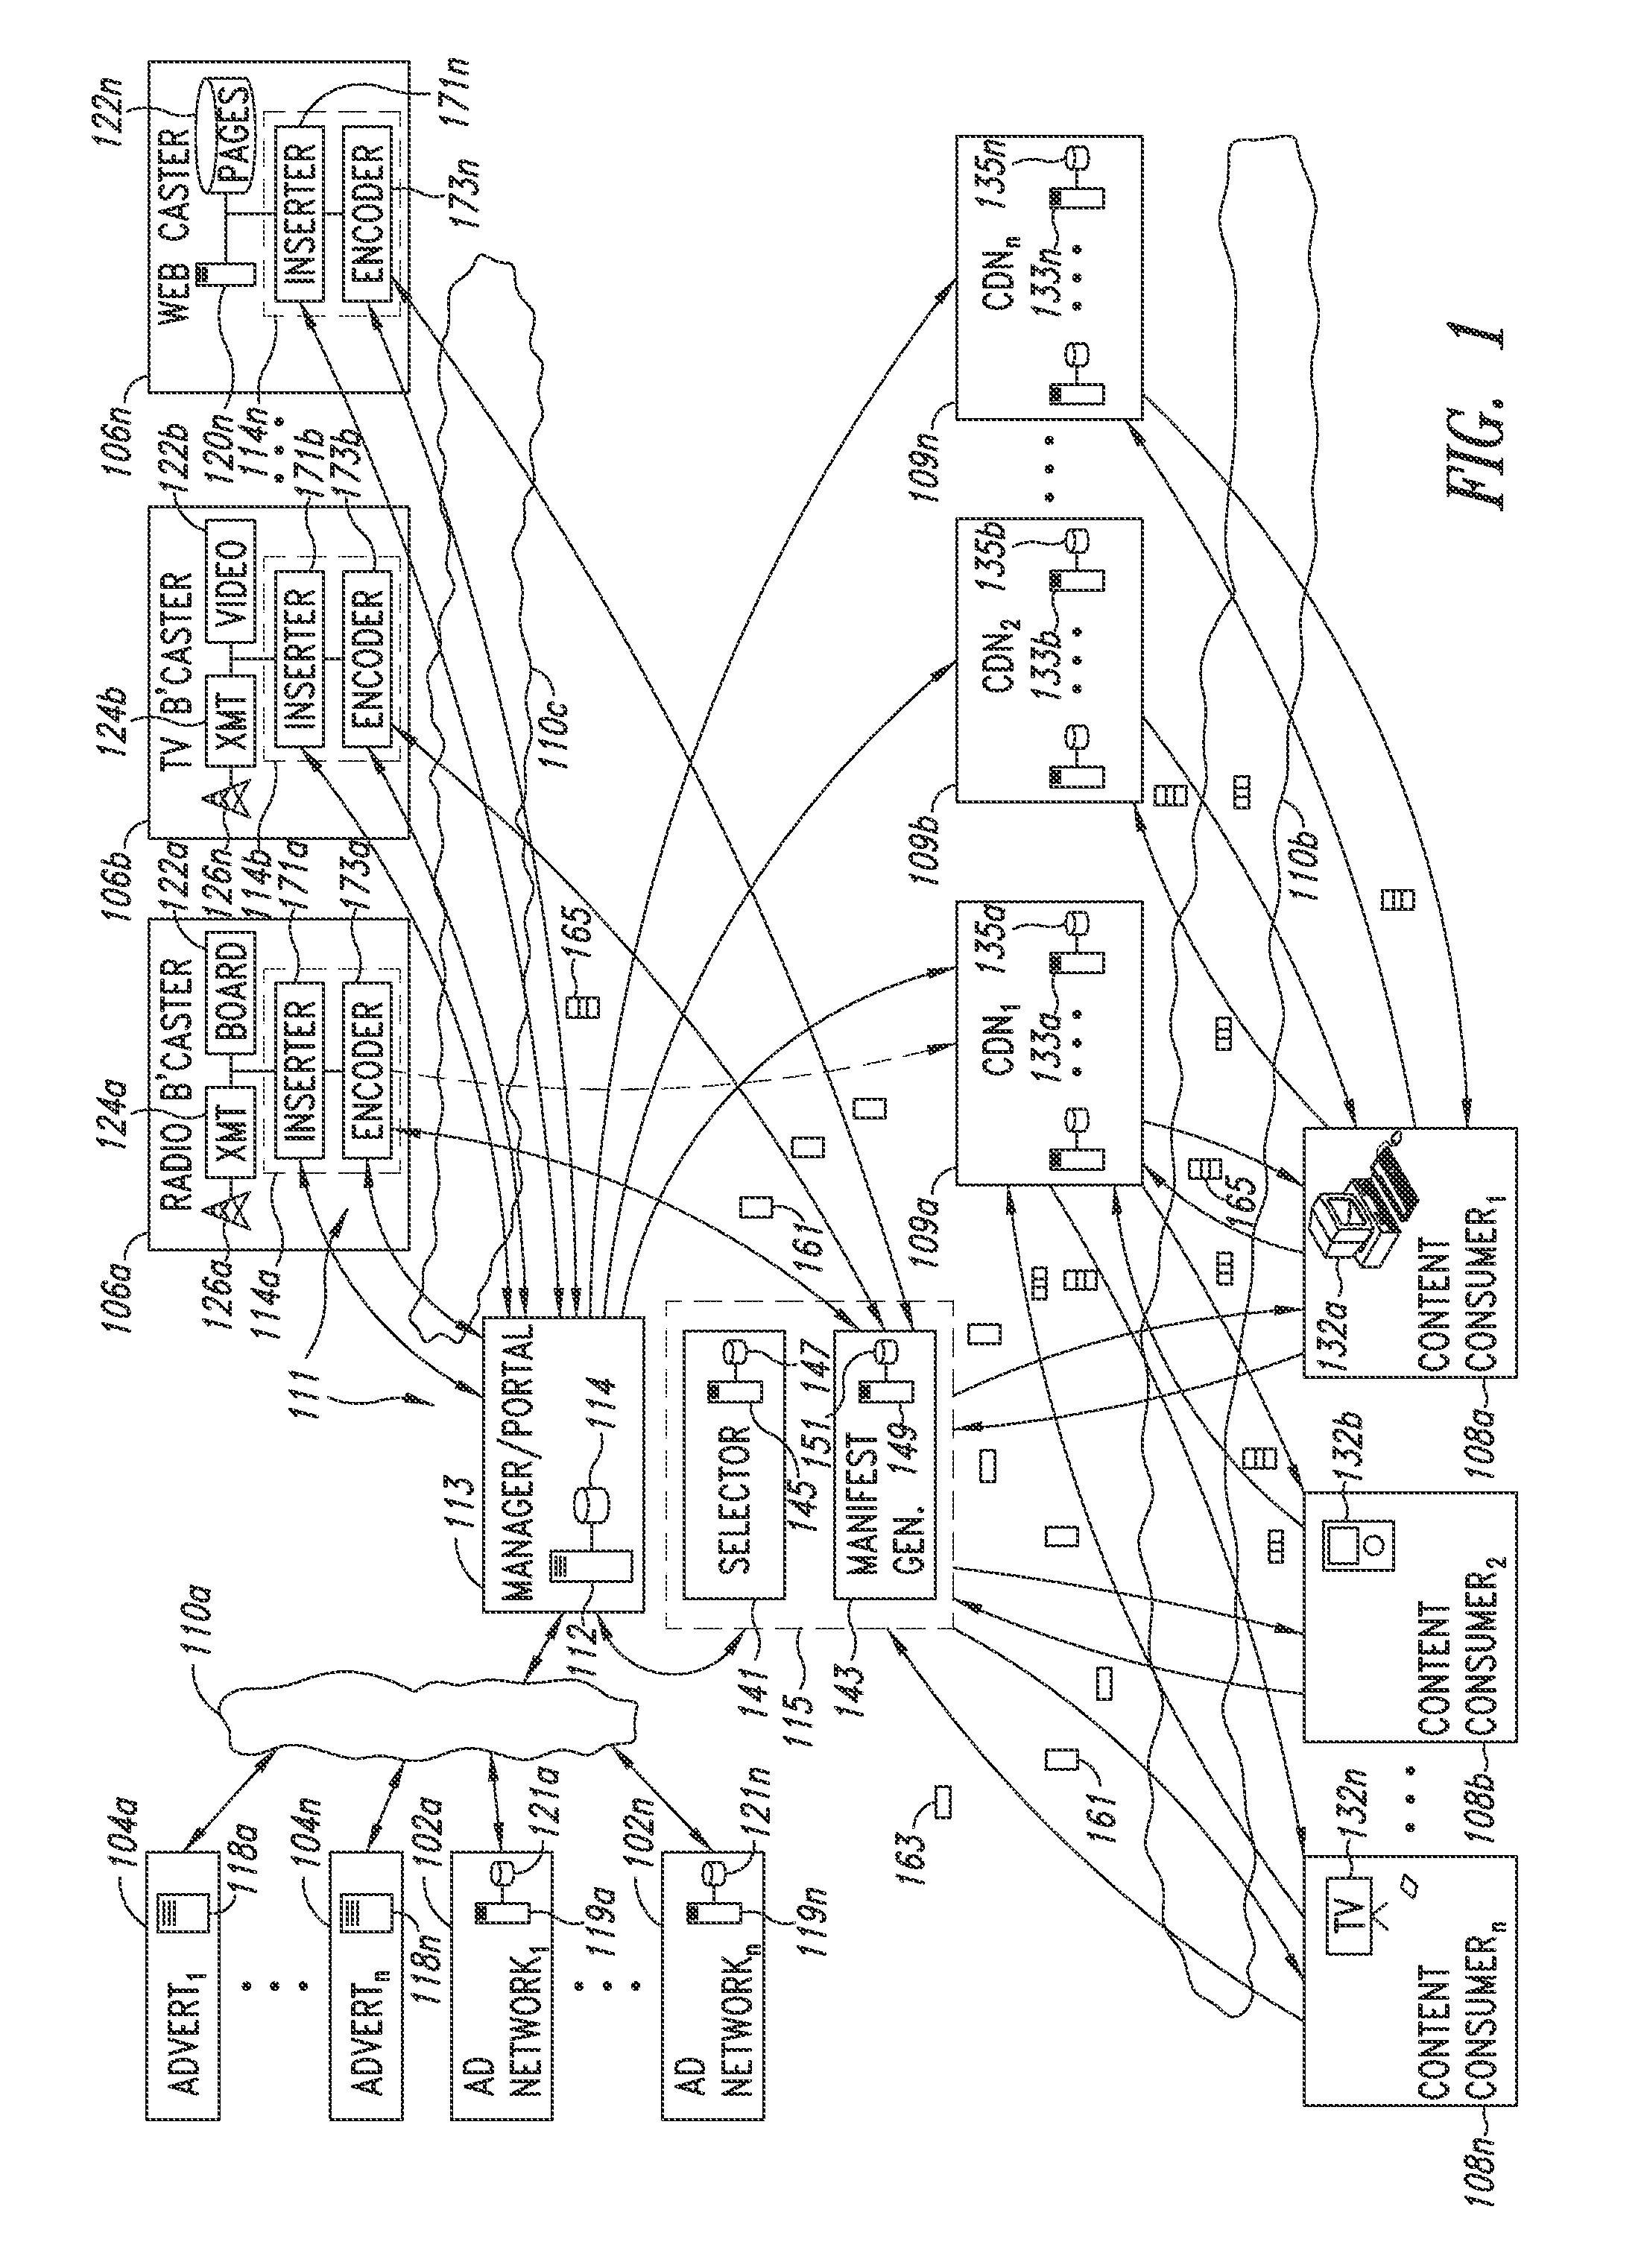 Systems, methods and articles to provide content in networked environment